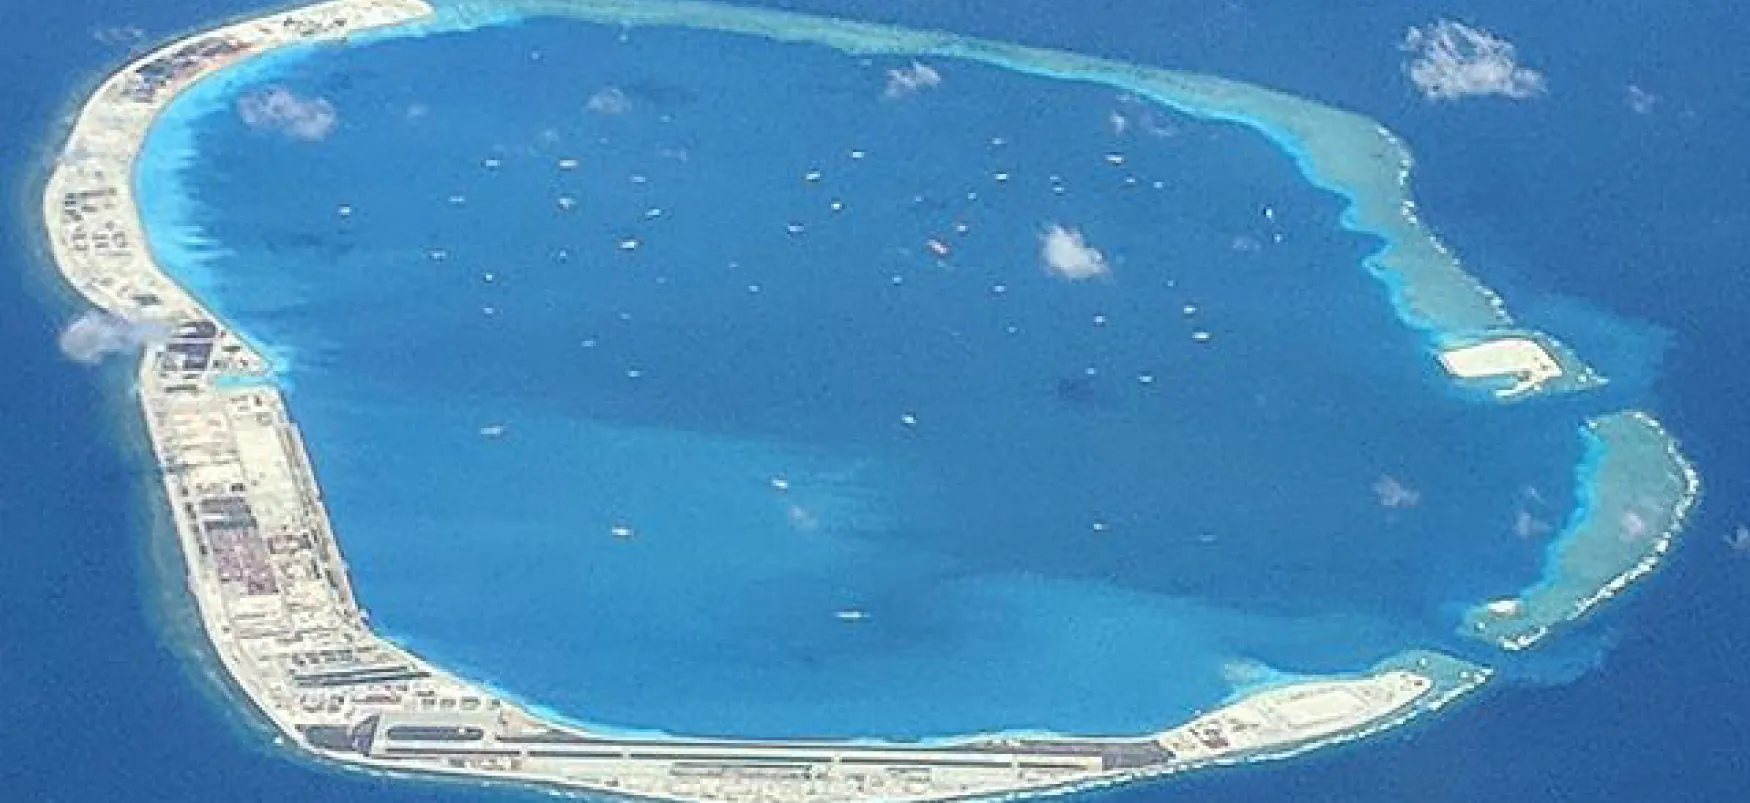 A small man-made island in the South China Sea is seen from above. The island is a narrow ring, with a small inlet allowing water into the interior of the island.